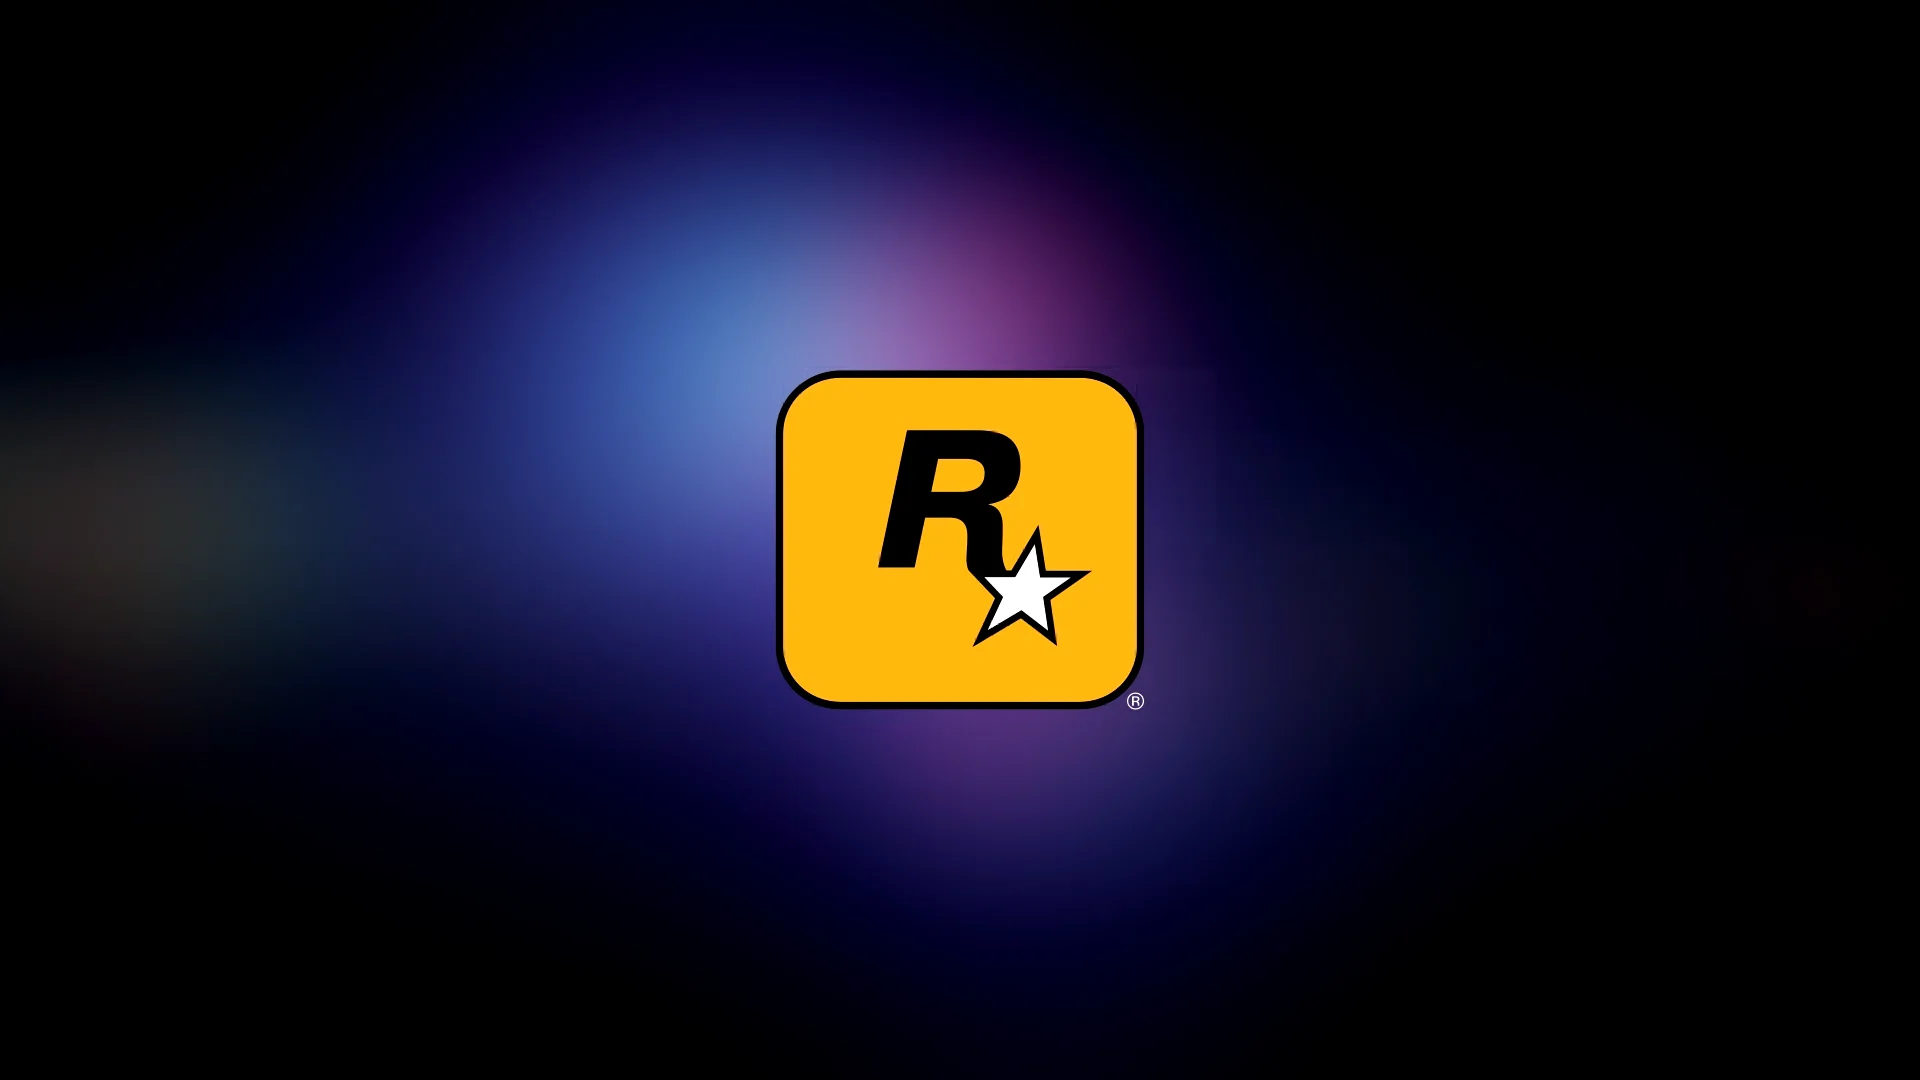 A new Rockstar Games logo with references to the studio's games has appeared online